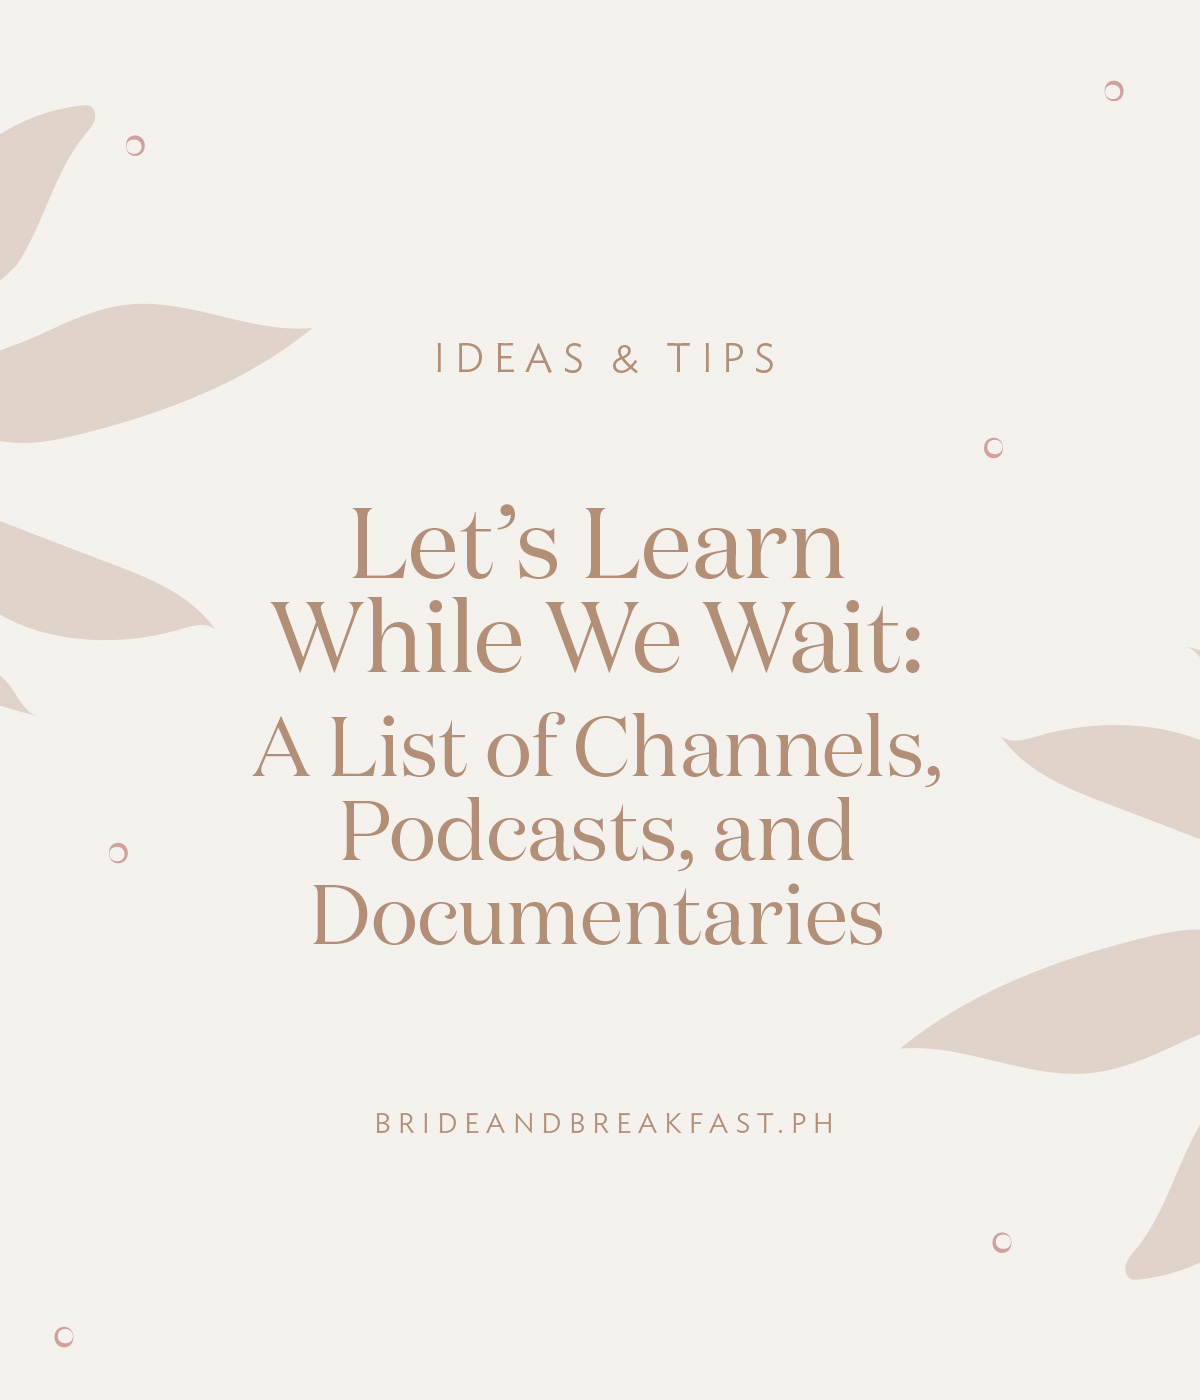 Let's Learn While We Wait: A List of Channels, Podcasts, and Documentaries